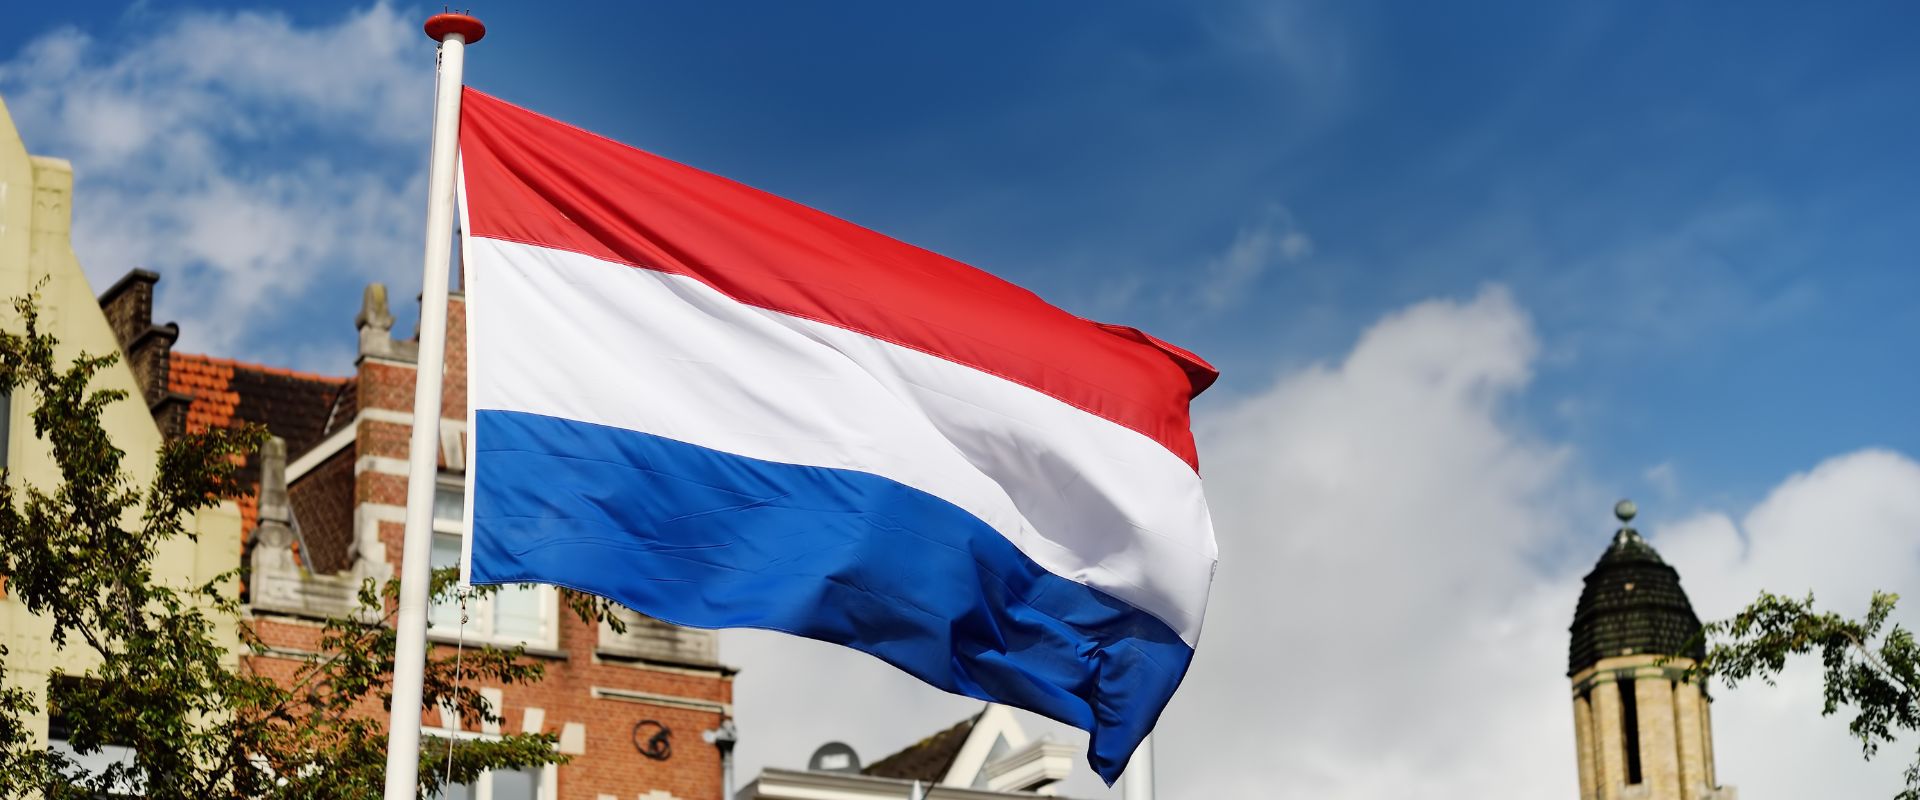 waving Dutch flag on building and sky background